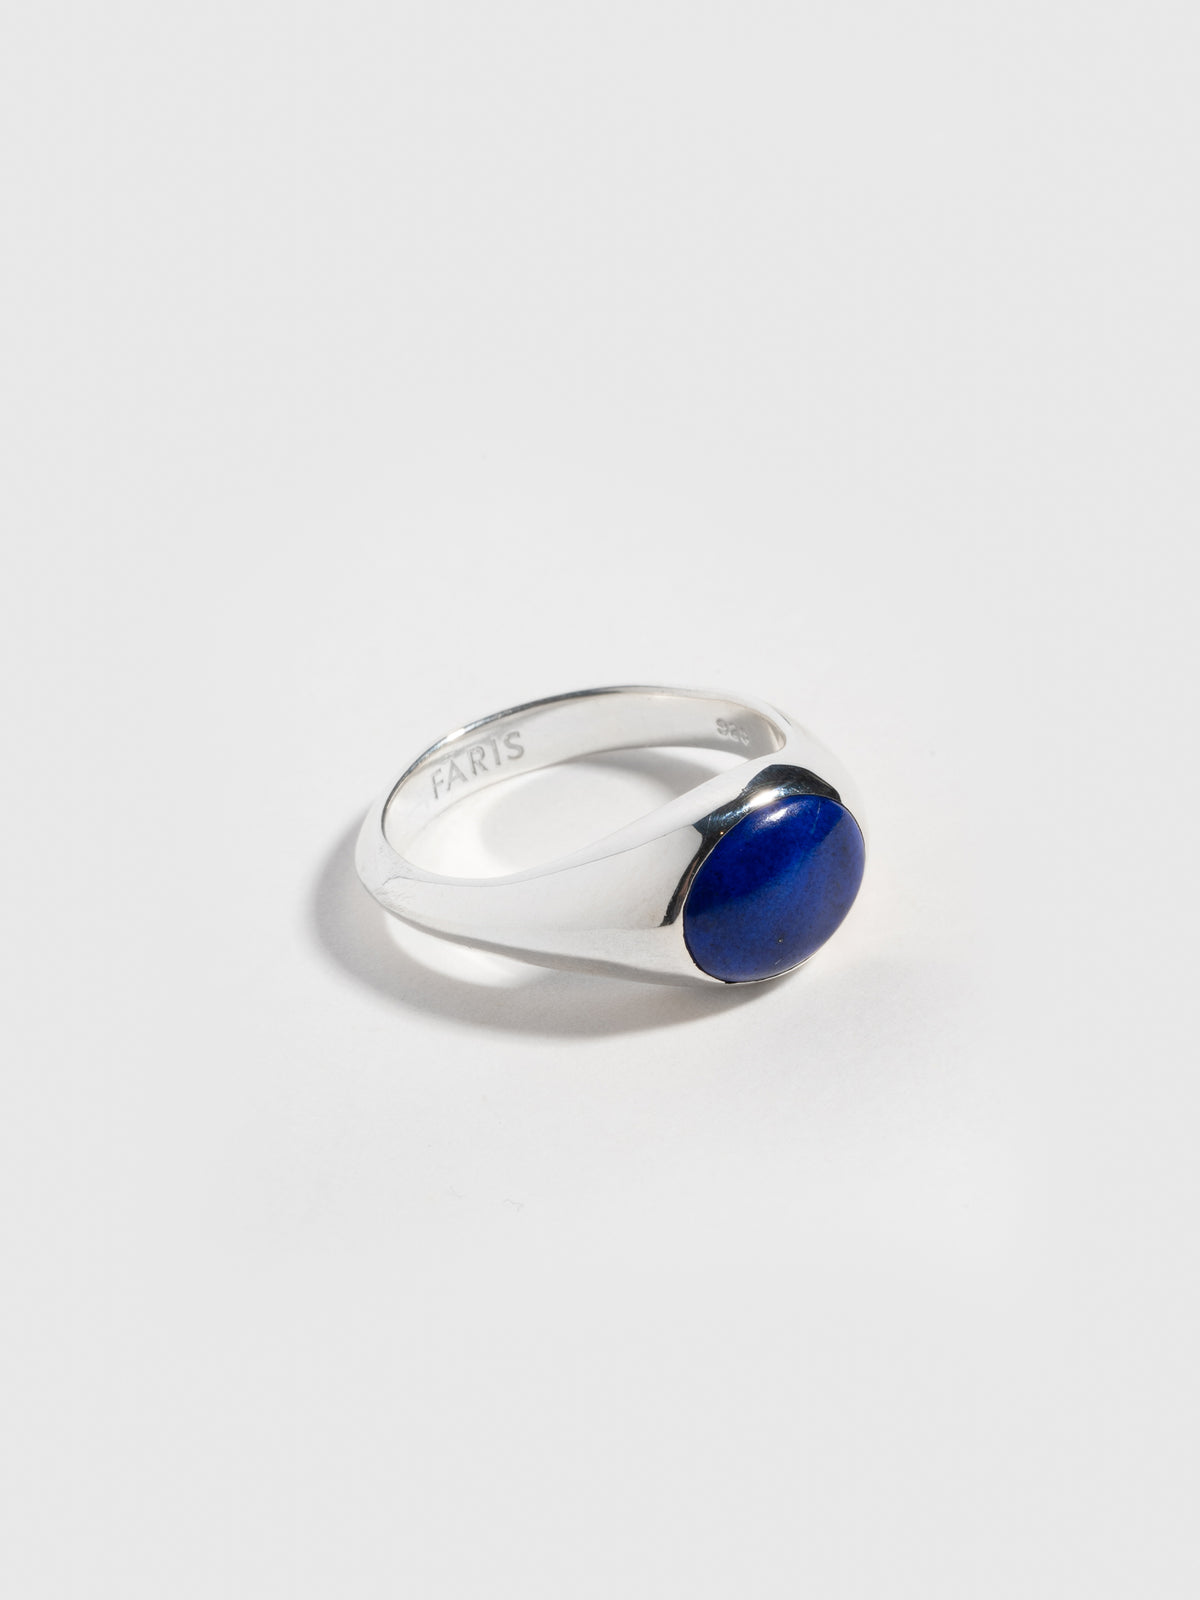 FARIS EYE Ring in sterling silver with lapis